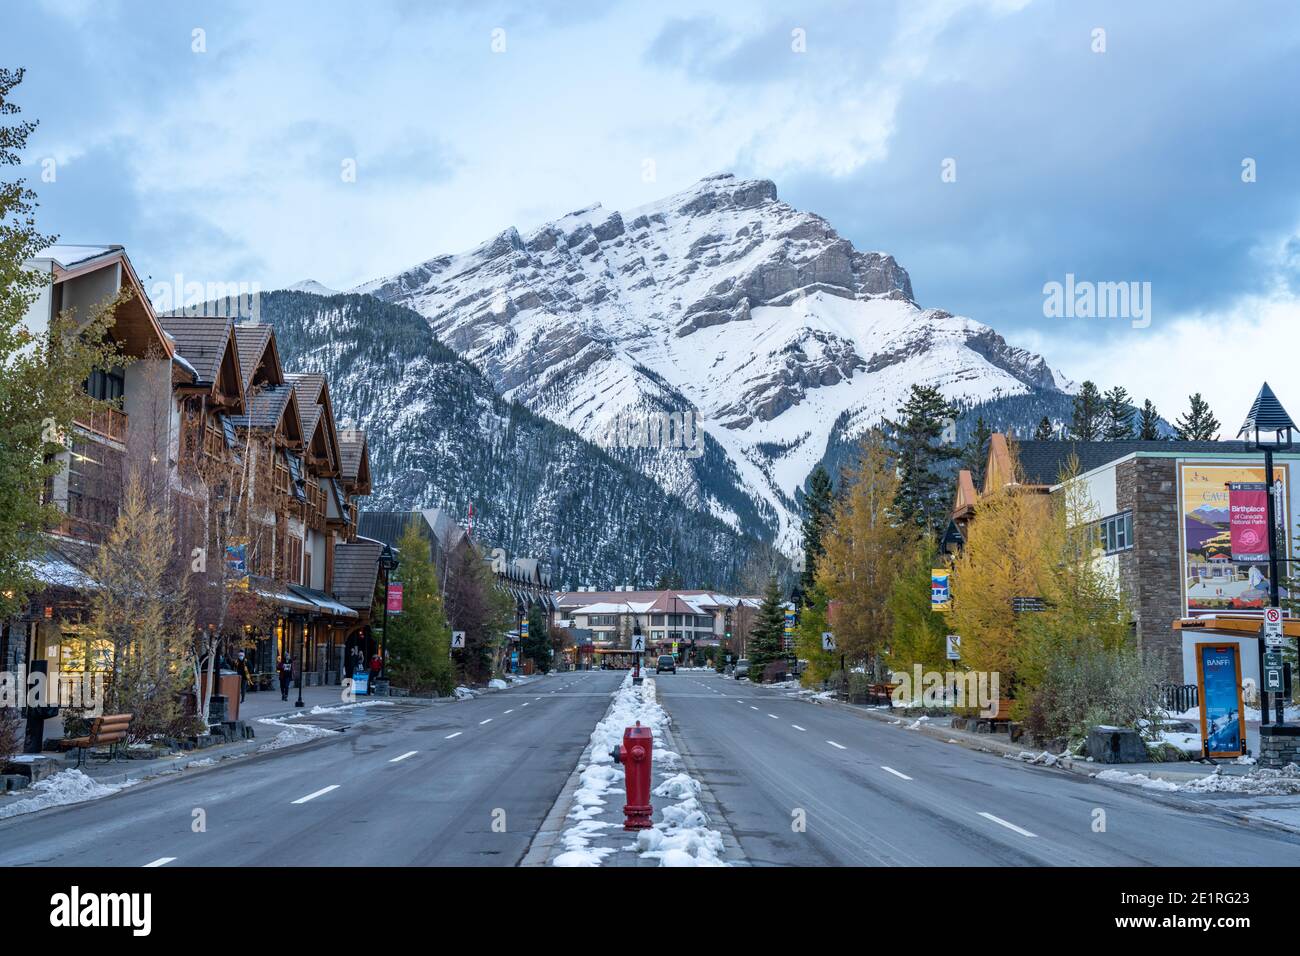 Banff Avenue street view in snowy winter. Banff National Park, Canadian Rockies. Stock Photo